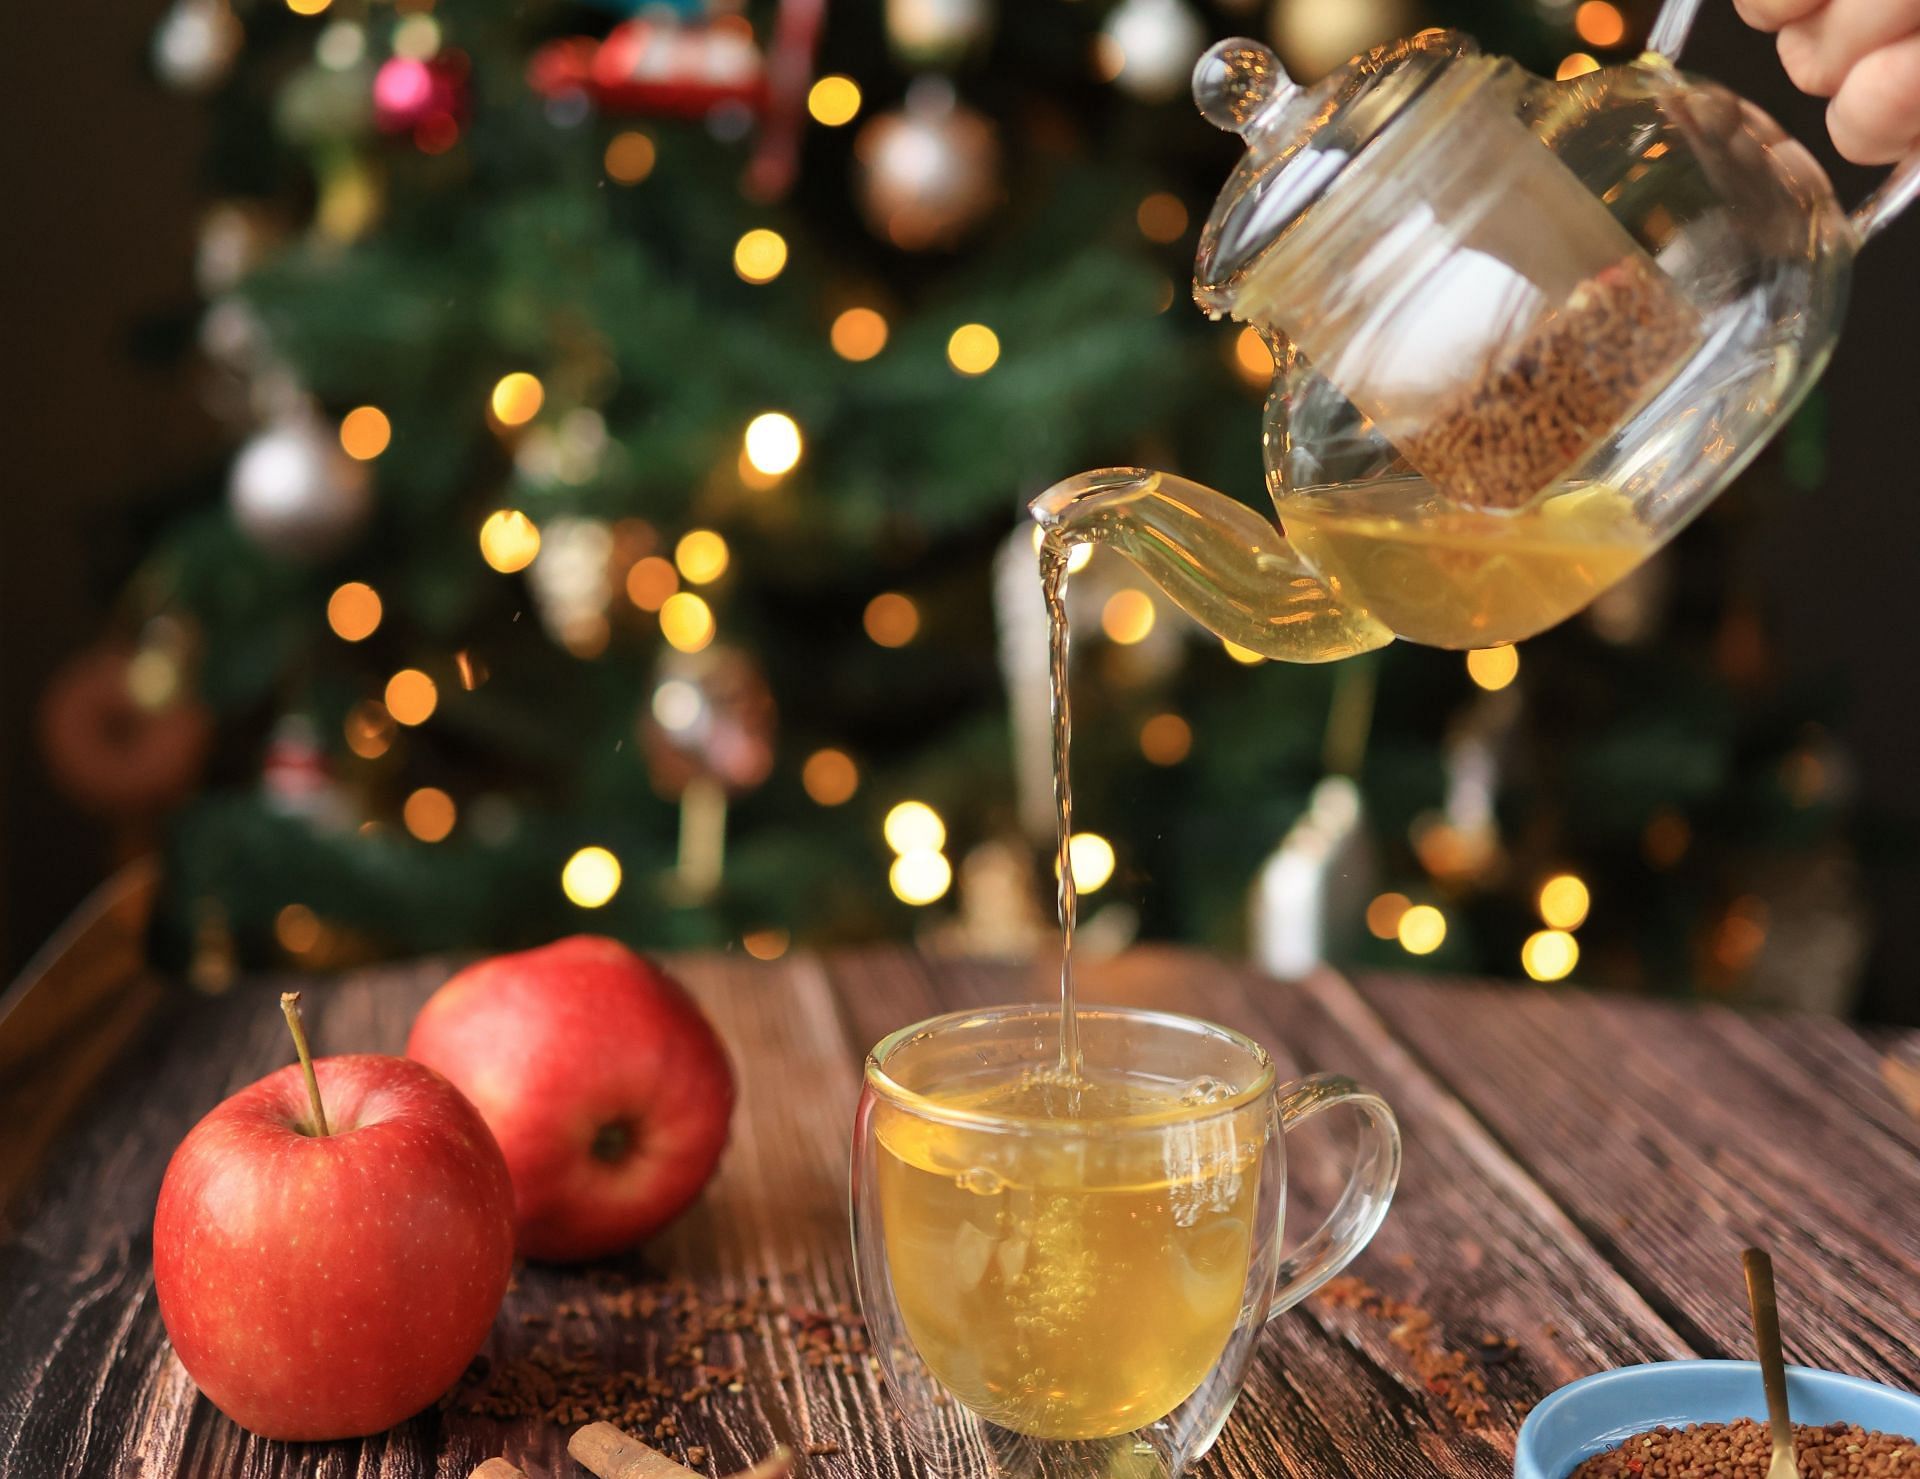 Apple tea has been steadily gaining popularity as a favored beverage in recent times. (Valeria Boltneva/ Pexels)